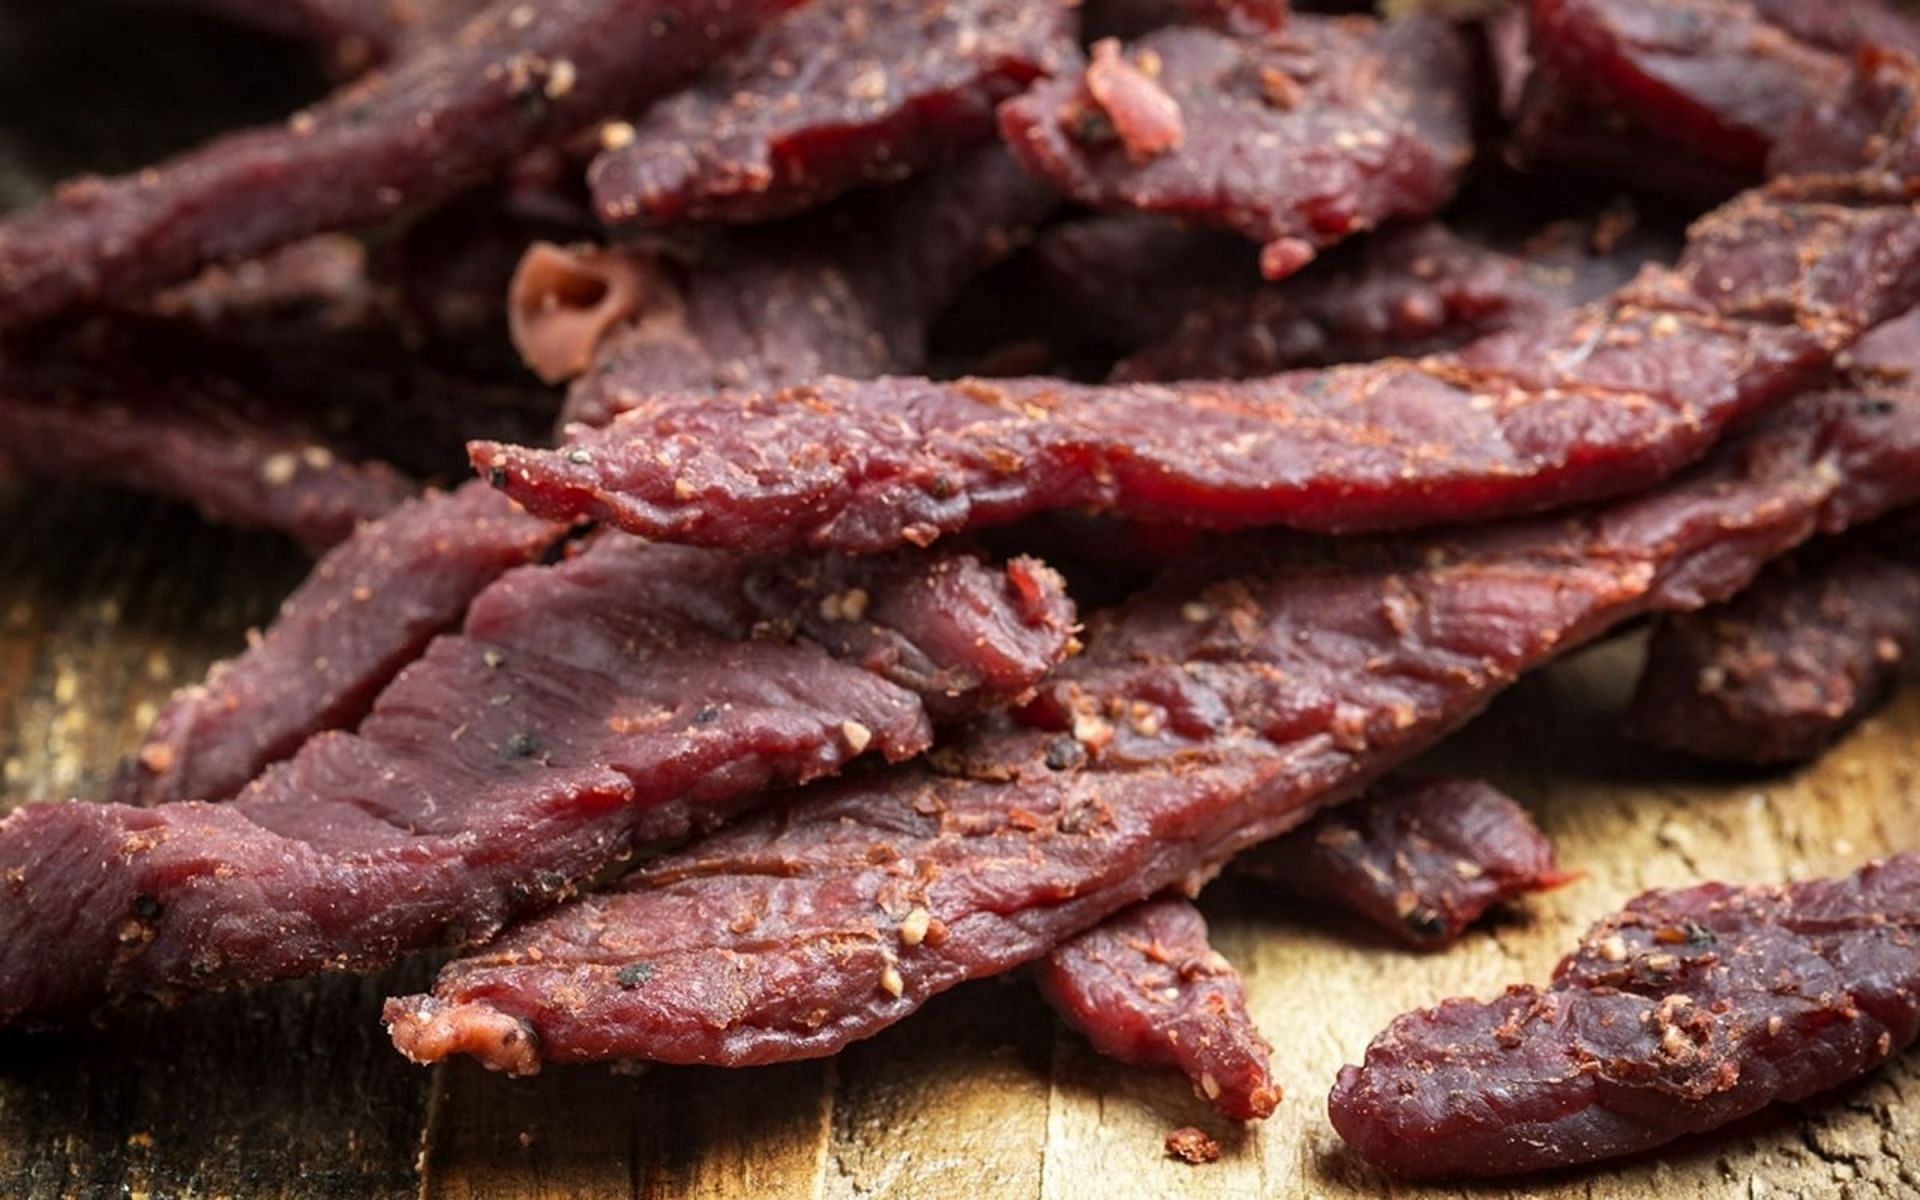 Beef Jerky products are being recalled over Listeria infection (Image via Juanmonino/Getty Images)